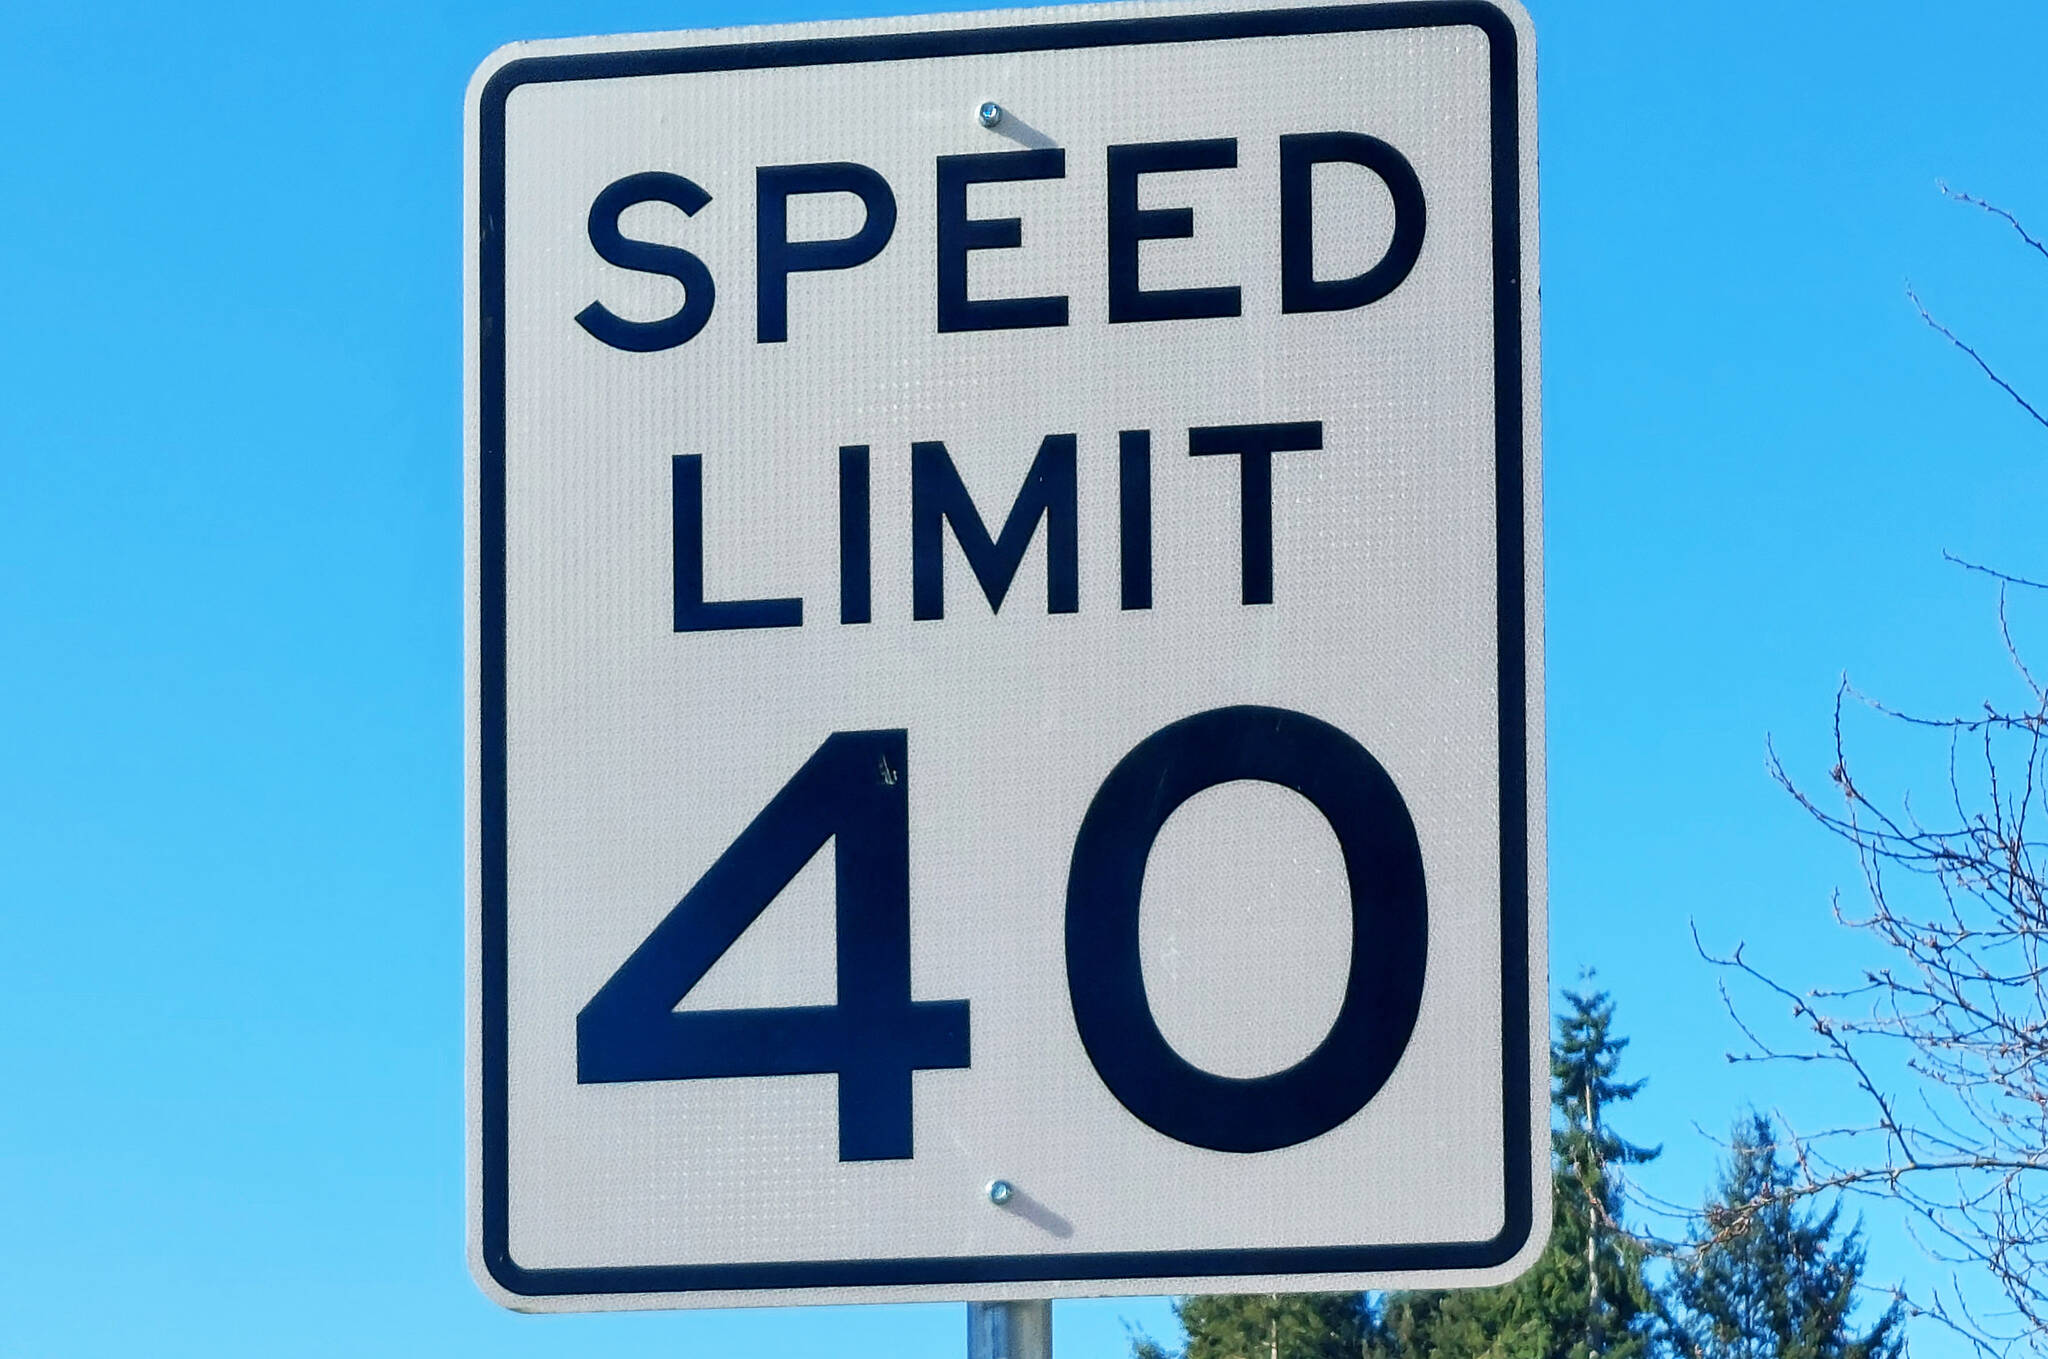 The speed limit along Pacific Highway South in Kent will be lowered from 45 to 40 mph later this year between South 272nd Street and Kent Des Moines Road. Staff Photo, Kent Reporter